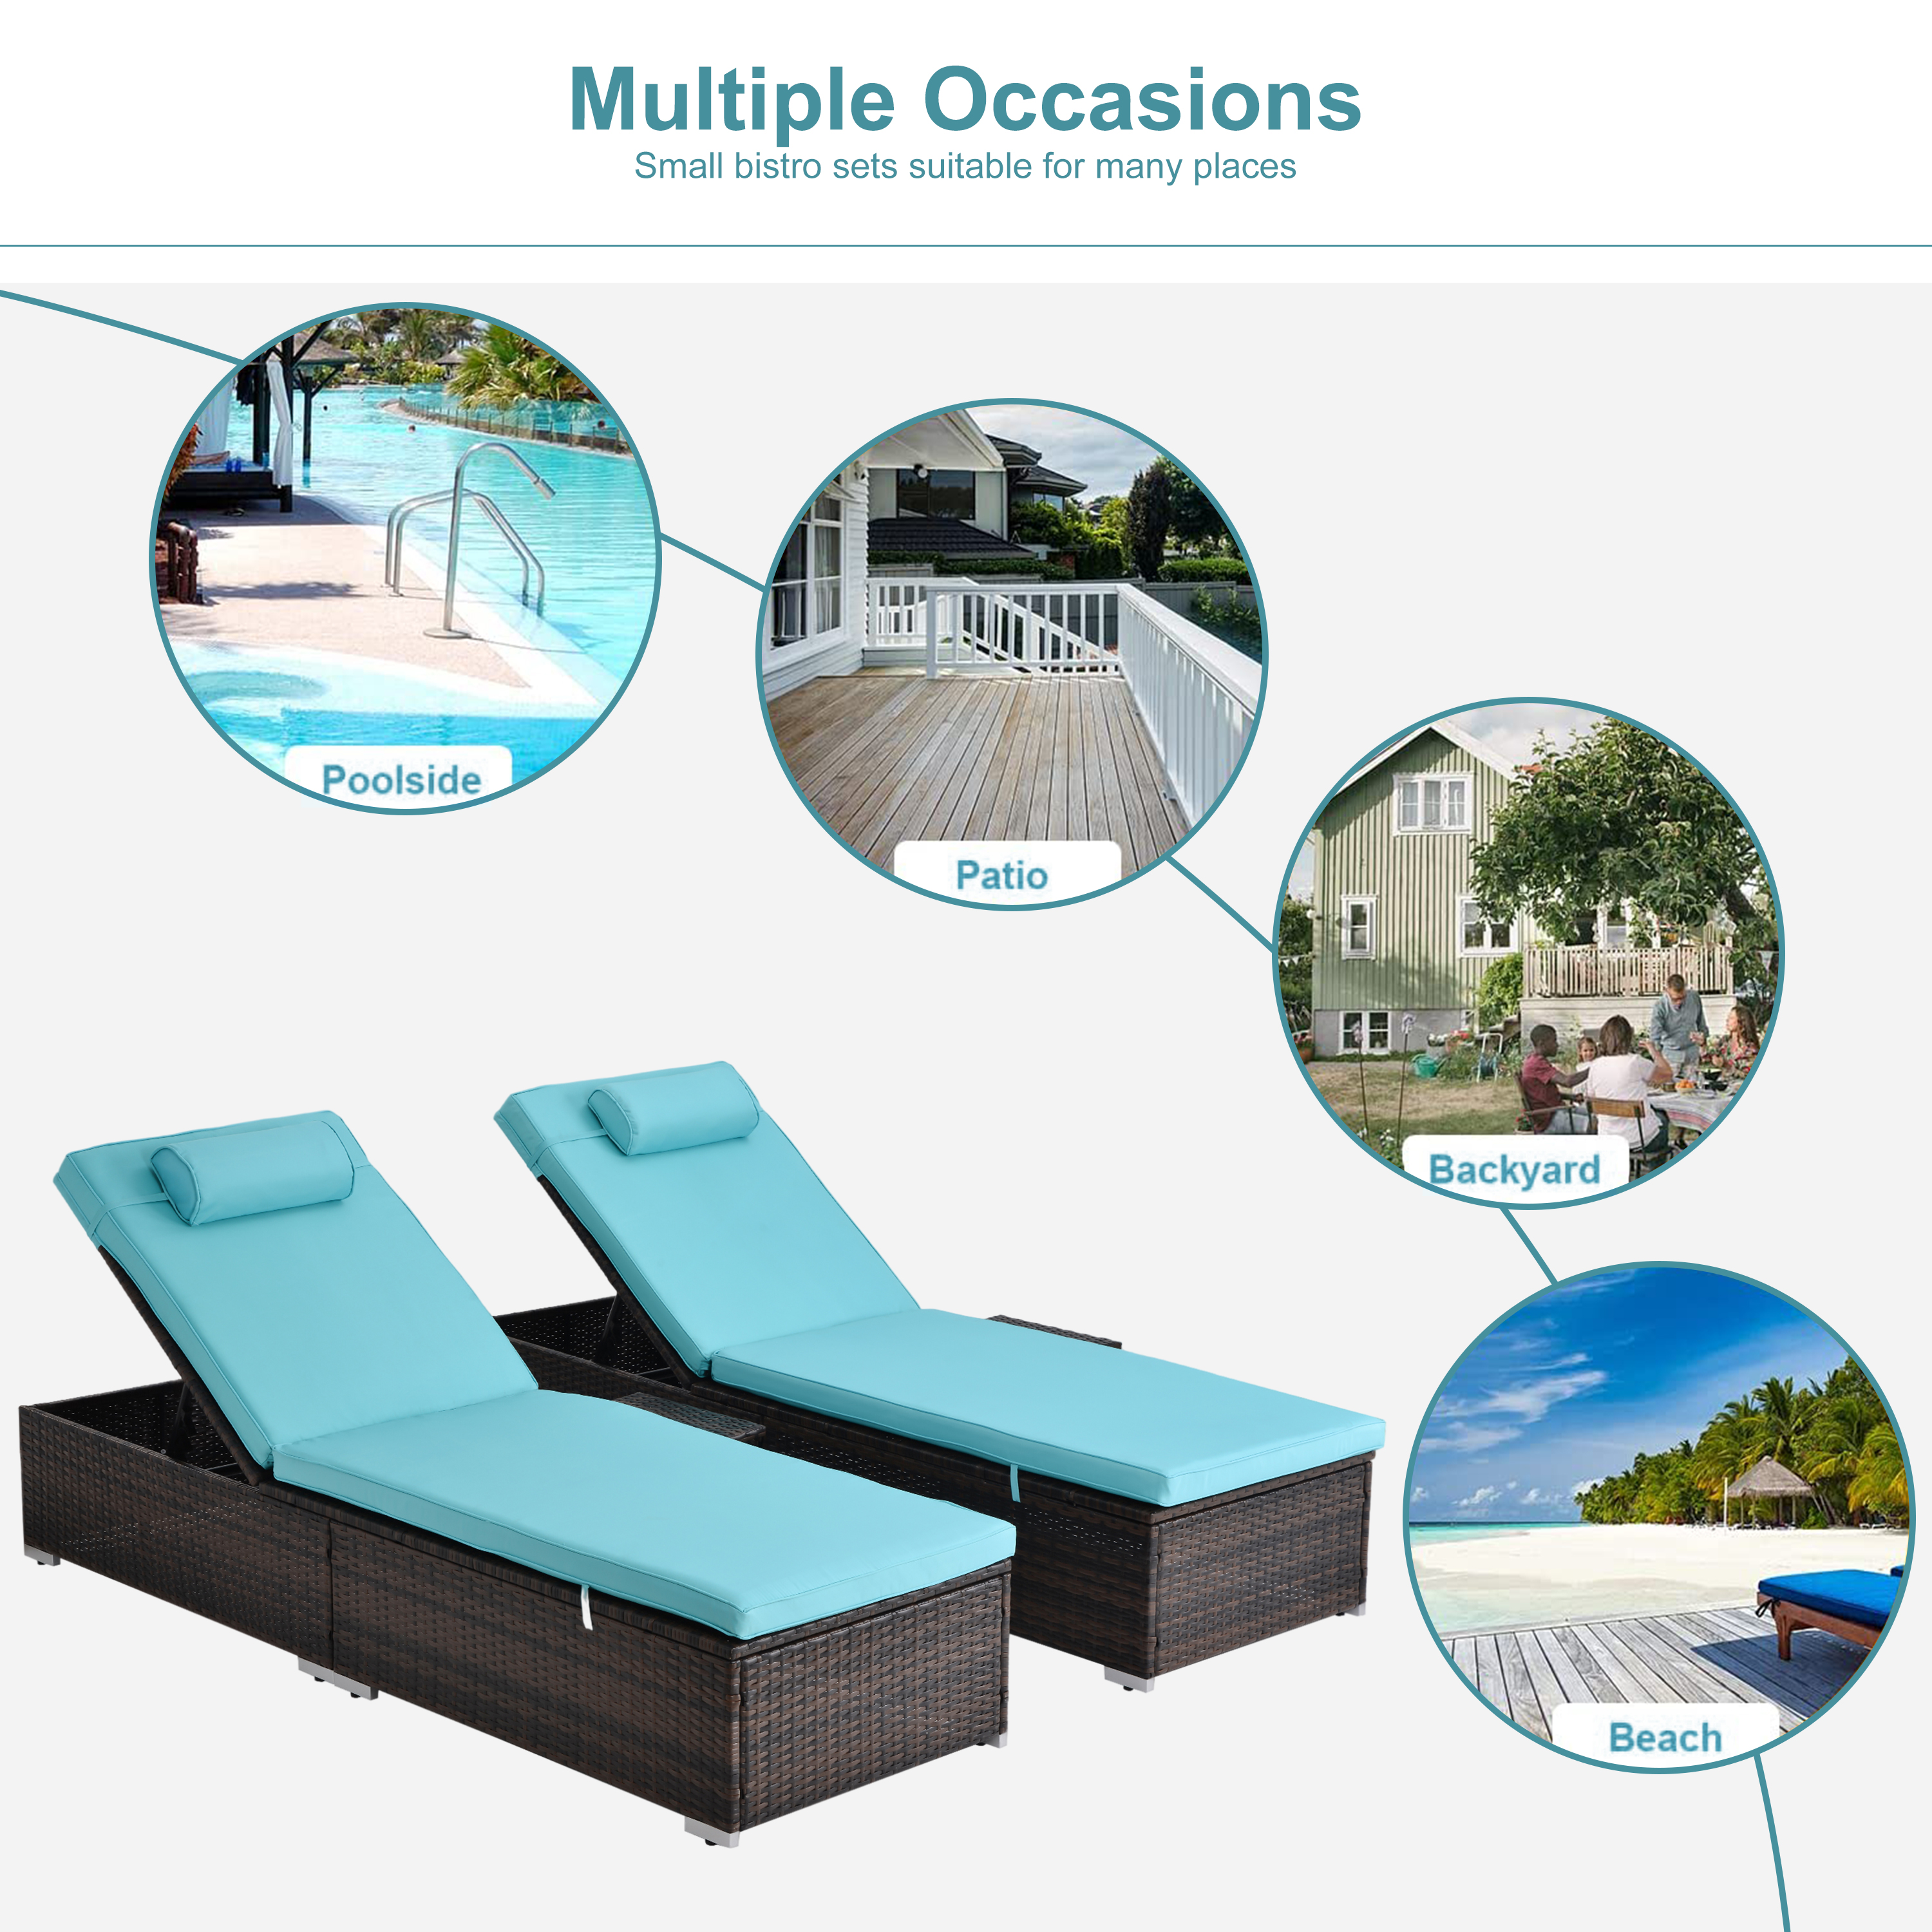 2 Pieces Outdoor Patio Lounge Furniture Set, Poolside Reclining PE Rattan Chaise Recliners with Side Table, Tempered Glass Top Coffee Table, Brown PE Wicker and Blue Cushions, SS2341 - image 3 of 8